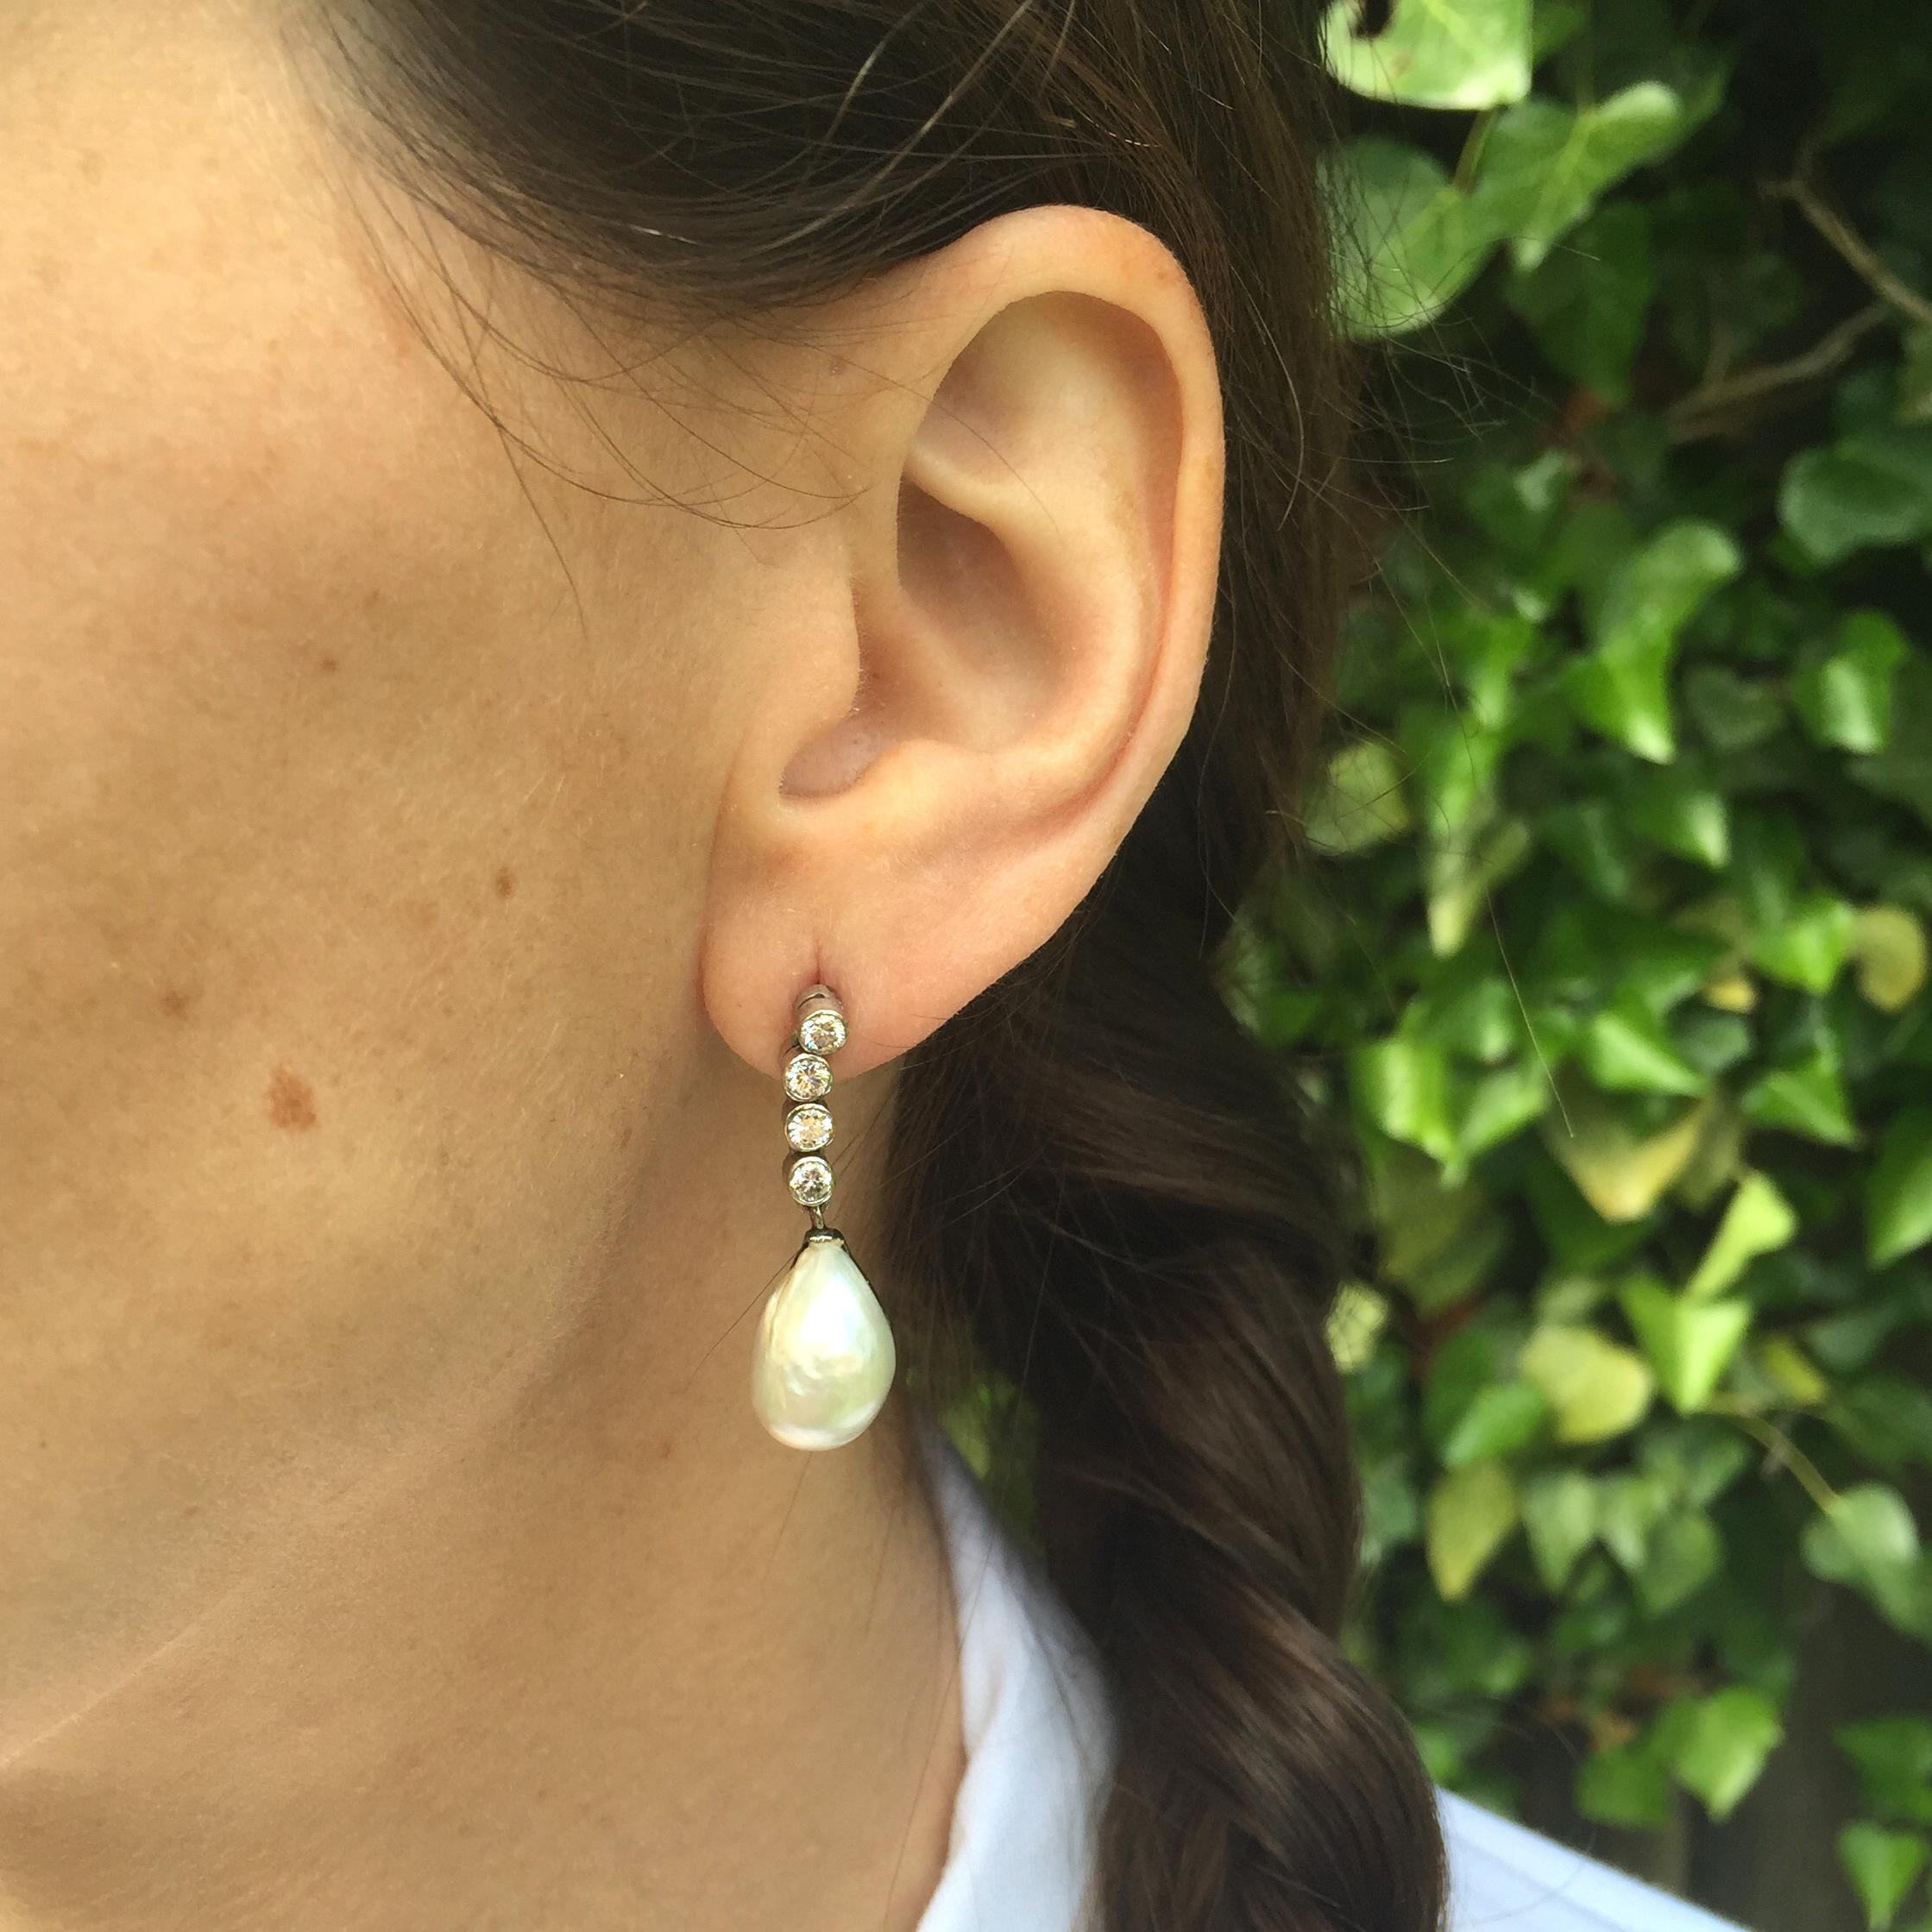 A truly phenomenal pair of earrings. A large pair of matching irregular drop-shaped natural saltwater pearls hang from an articulated line of brilliant cut diamonds. A rare and striking find that look fantastic when worn.

Accompanied by a Pearl